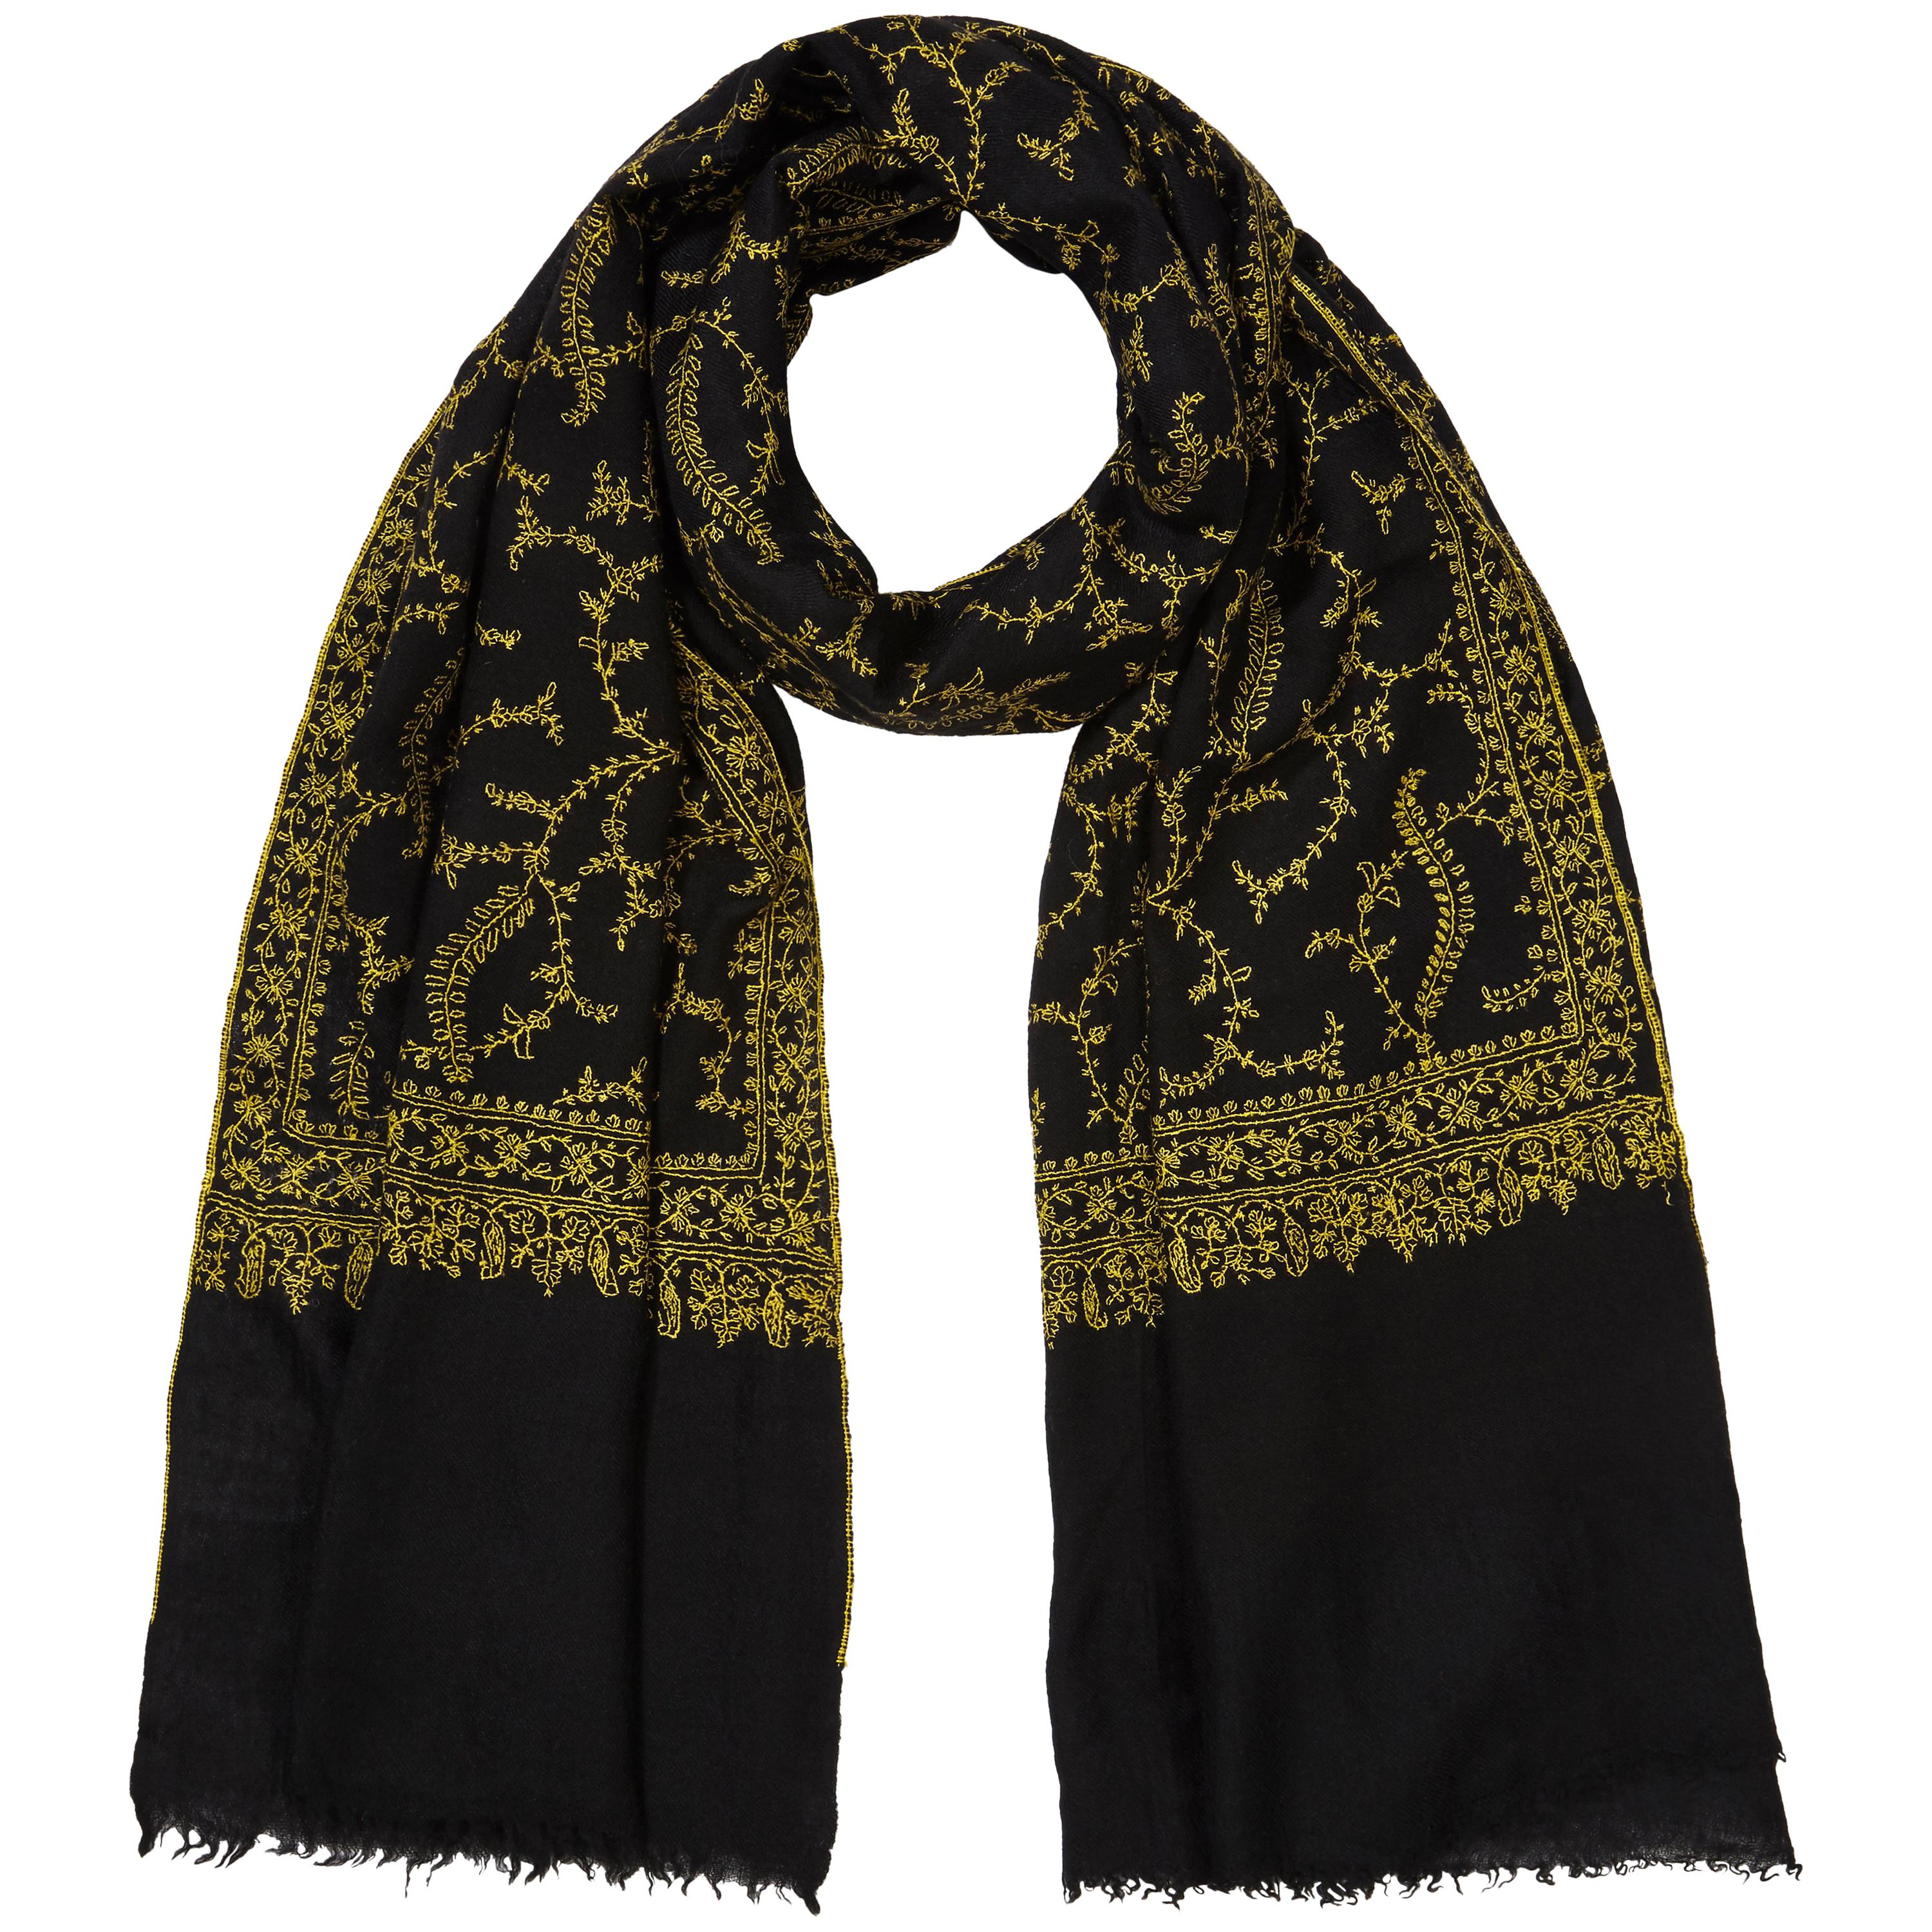 Limited Edition Hand Embroidered Black & Yellow 100% Cashmere Shawl - Gift 